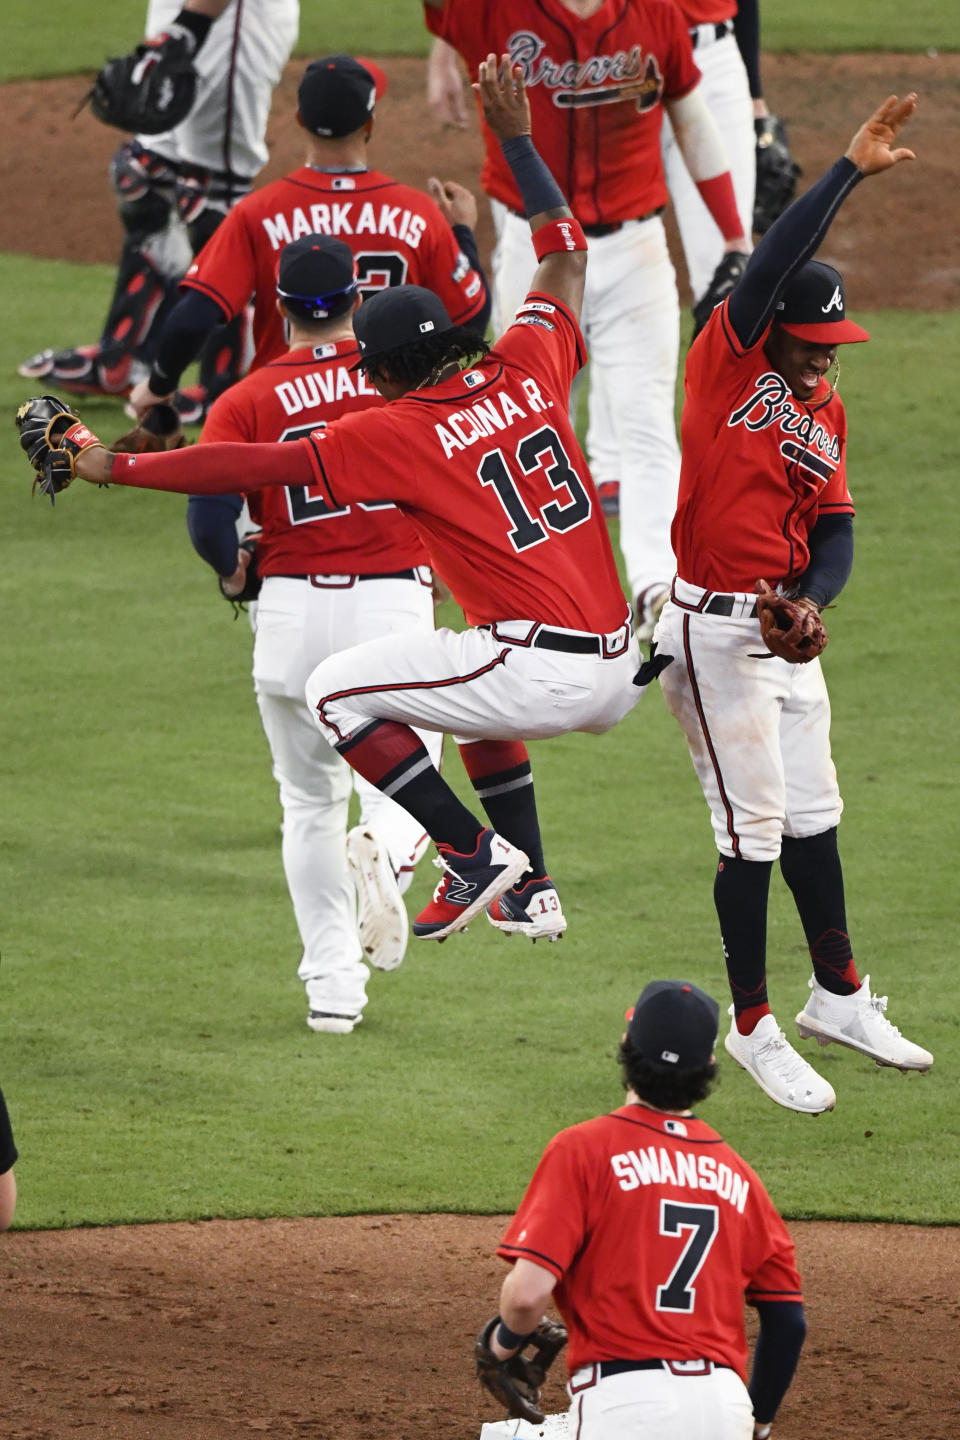 Atlanta Braves center fielder Ronald Acuna Jr. (13), celebrates with Atlanta Braves second baseman Ozzie Albies (1) after Game 2 of a best-of-five National League Division Series against the St. Louis Cardinals, Friday, Oct. 4, 2019, in Atlanta. The Atlanta Braves won 3-0. (AP Photo/Scott Cunningham)